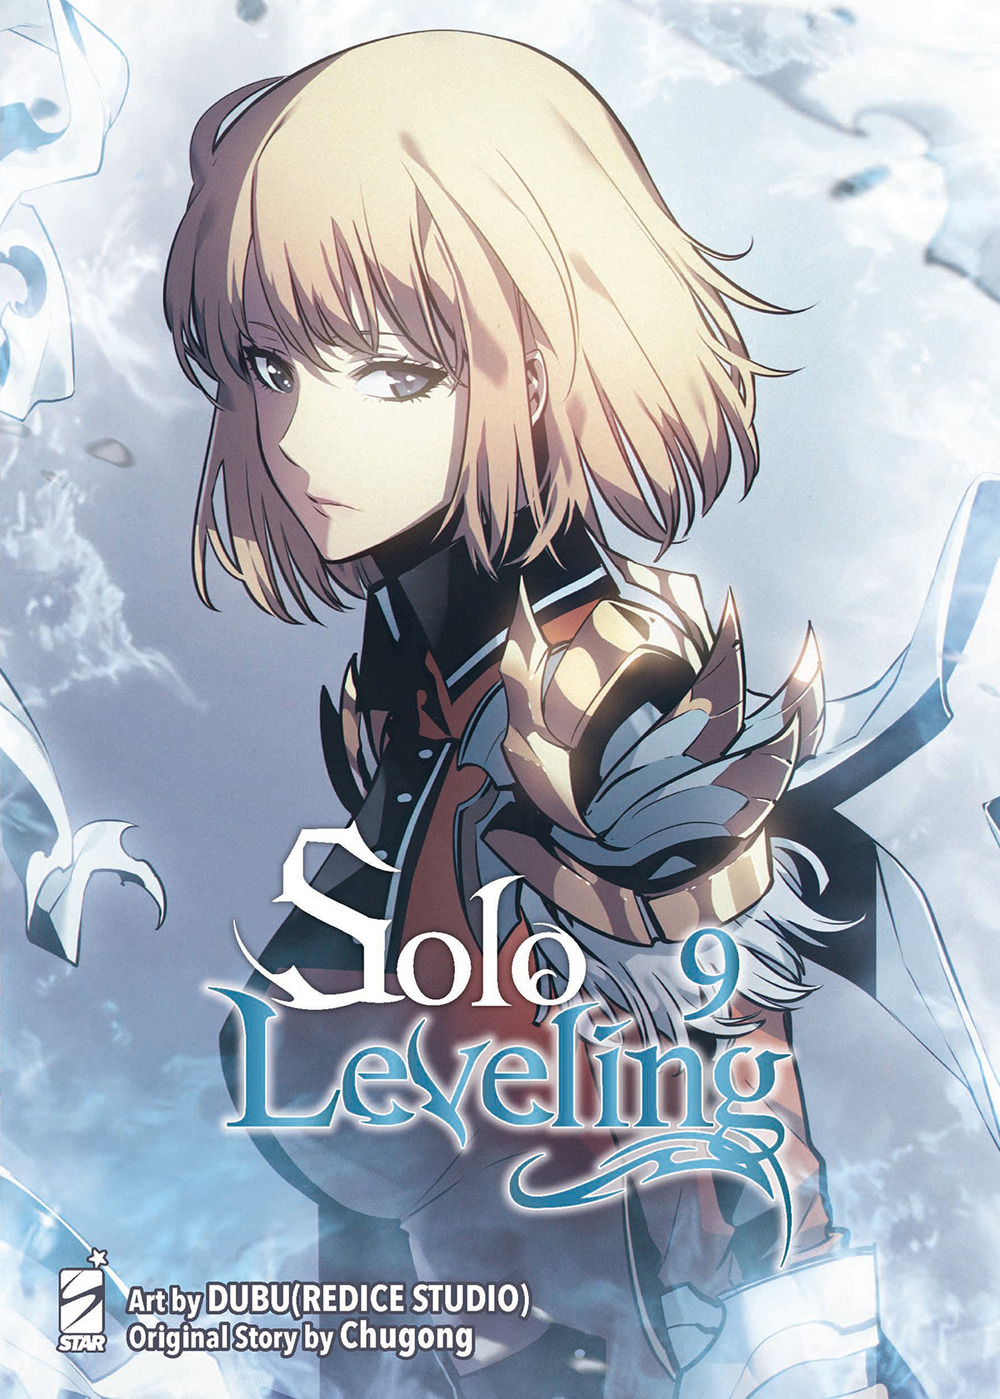 Solo leveling. Vol. 9